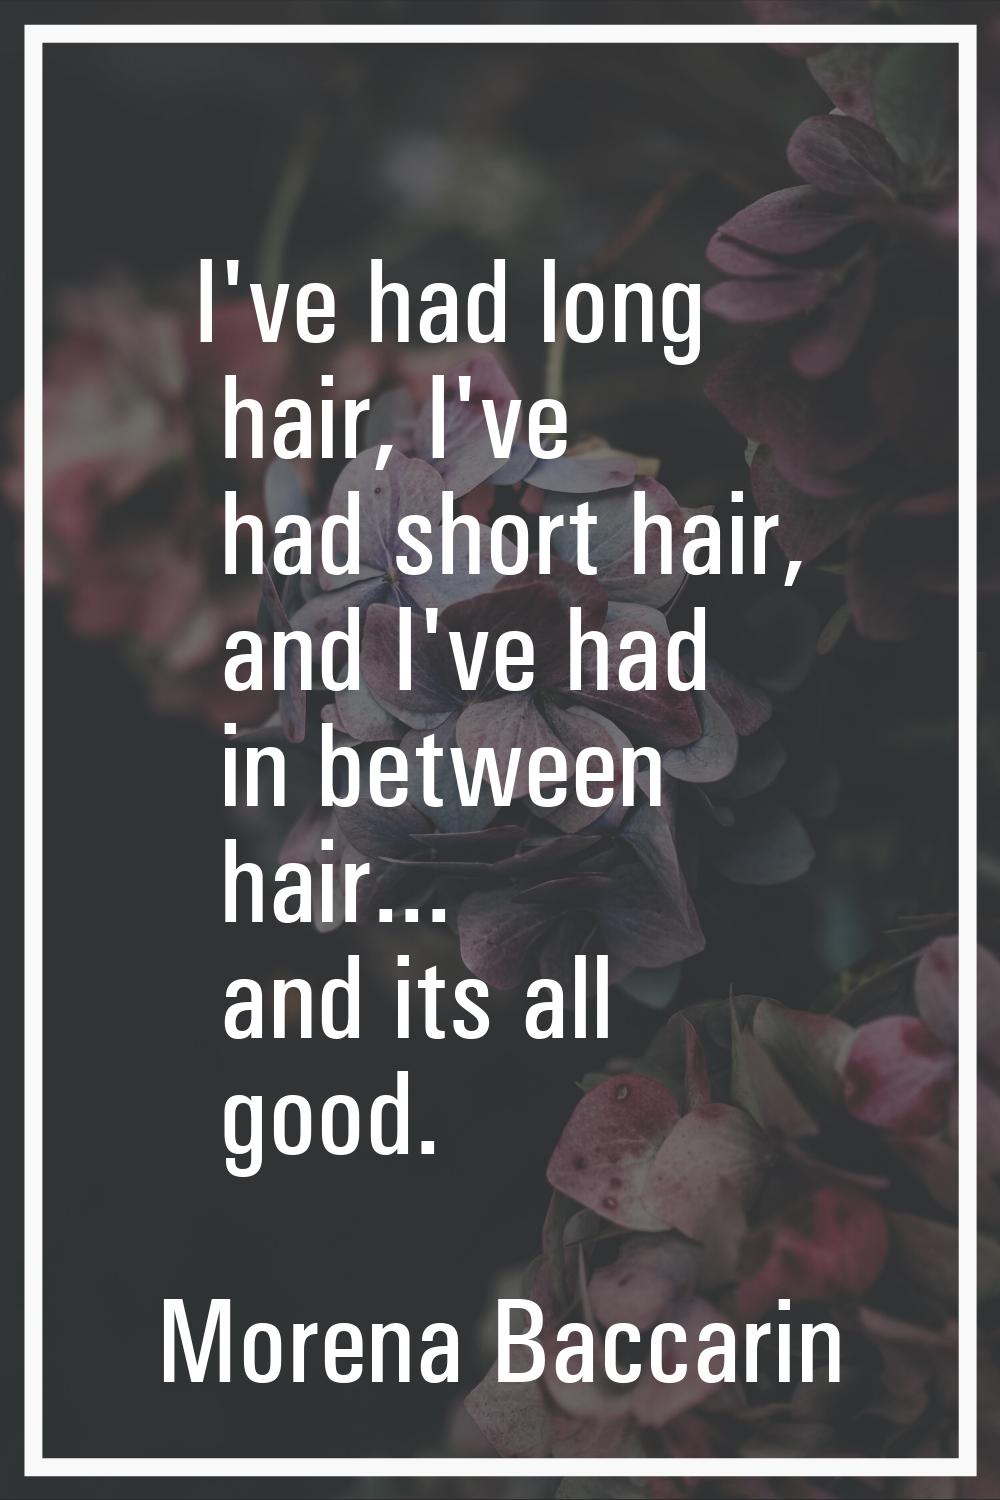 I've had long hair, I've had short hair, and I've had in between hair... and its all good.